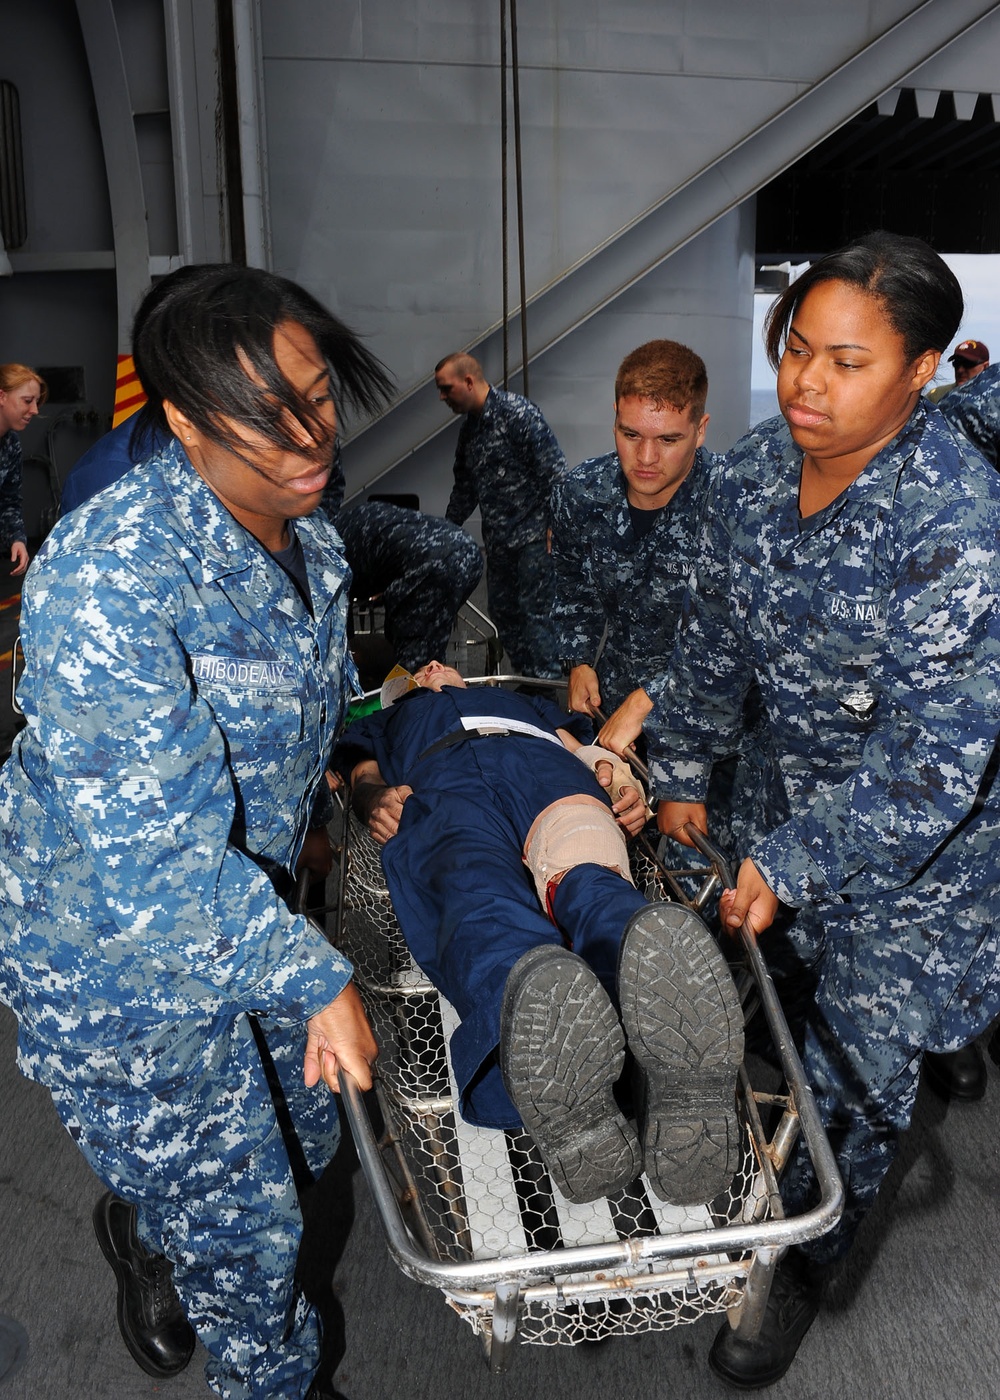 Mass-casualty exercise